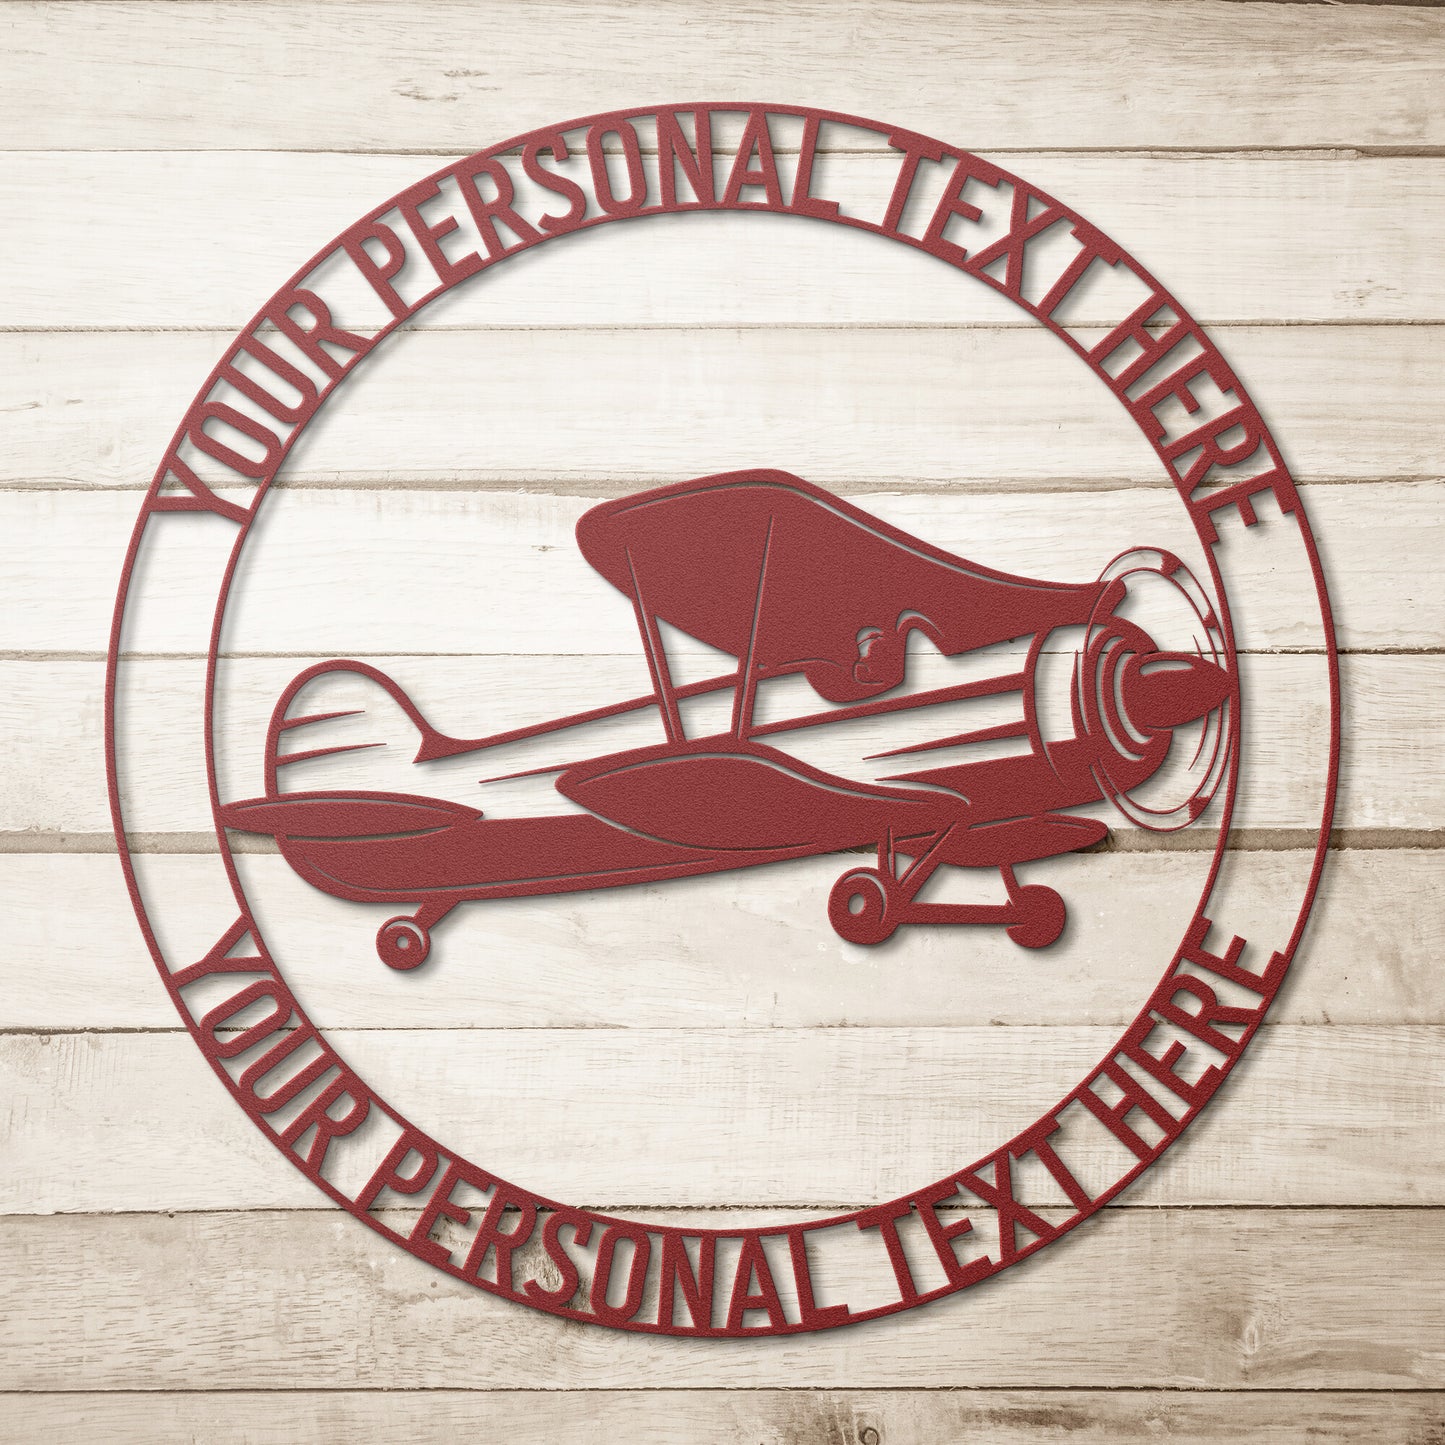 Biplane Personalized Name Metal Sign - Custom Airplane Steel Sign Monogram Gift - Personalizable Pilot Name Steel Sign - Pilot Aviator GiftPersonalized Aircraft Name Metal Sign. Custom Airplane Steel Sign Monogram. Personalizable Pilot Steel Sign. Biplane Aviator Gift. Airfield